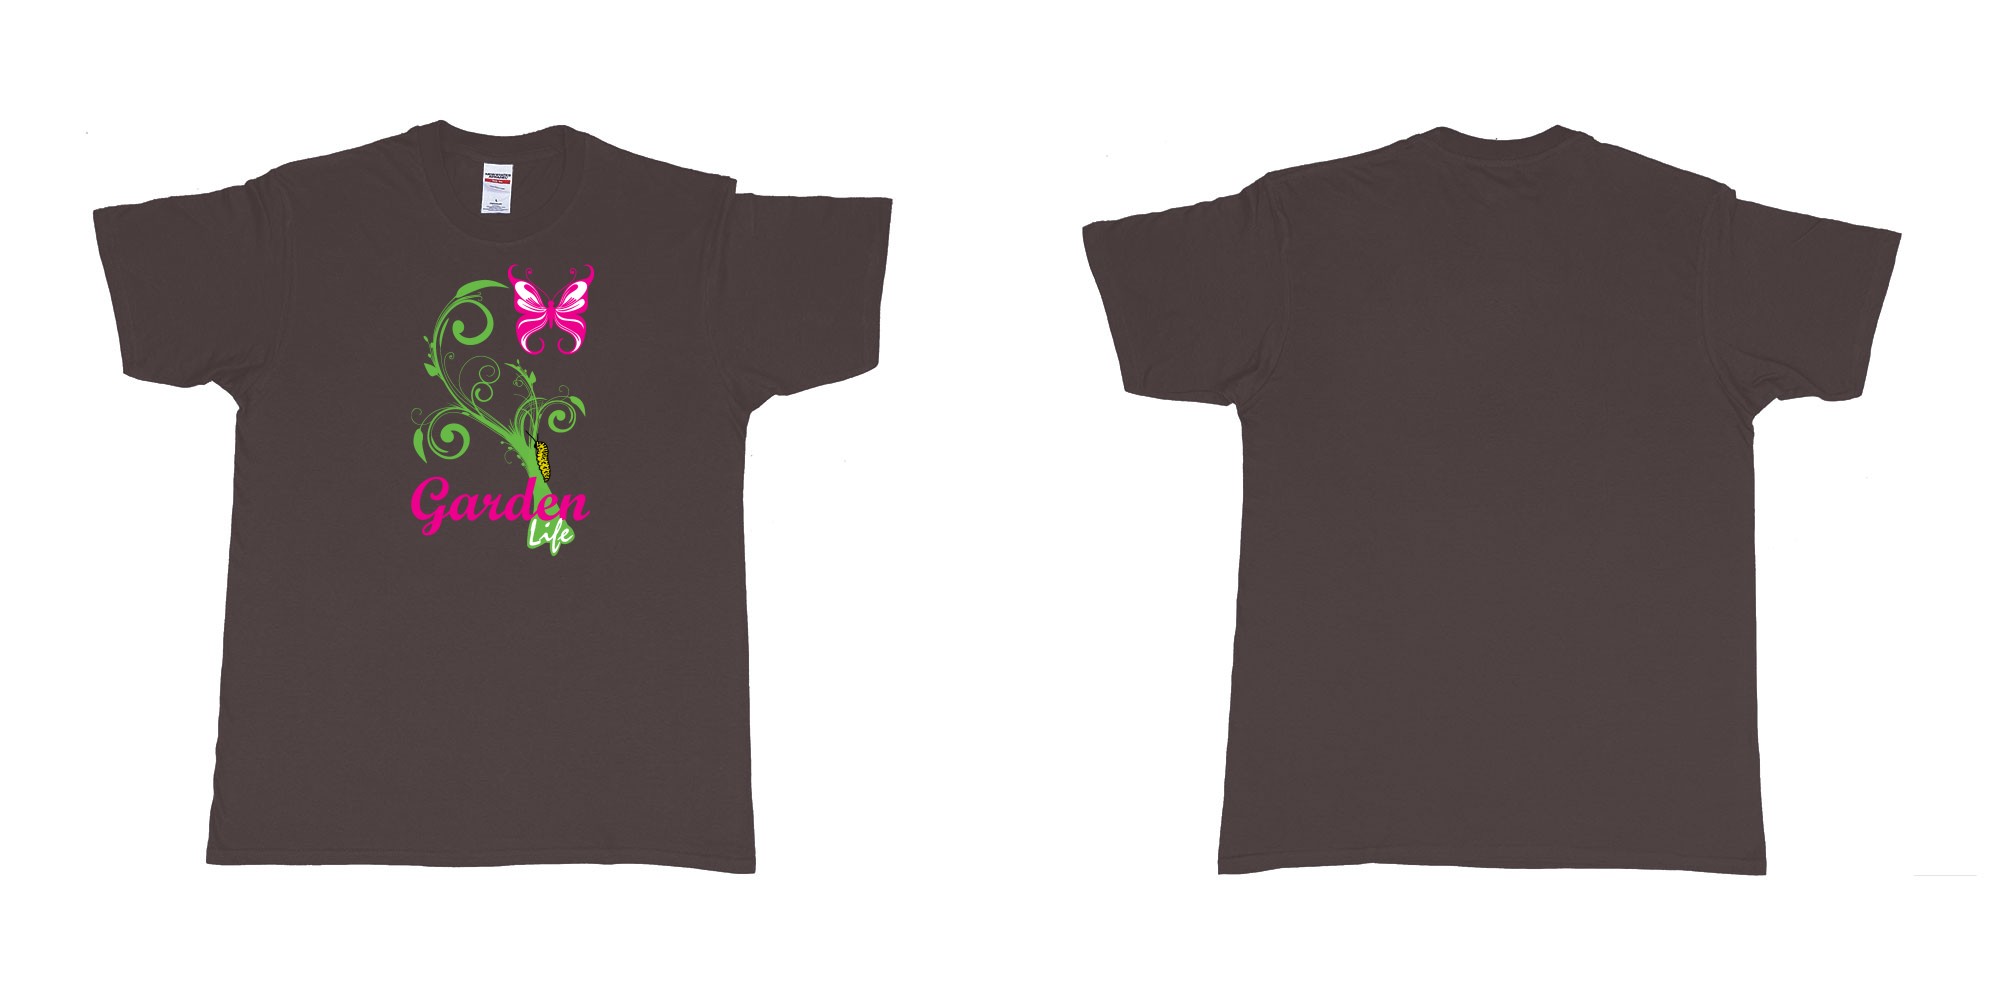 Custom tshirt design garden life transformation from a caterpillar and a butterfly in fabric color dark-chocolate choice your own text made in Bali by The Pirate Way